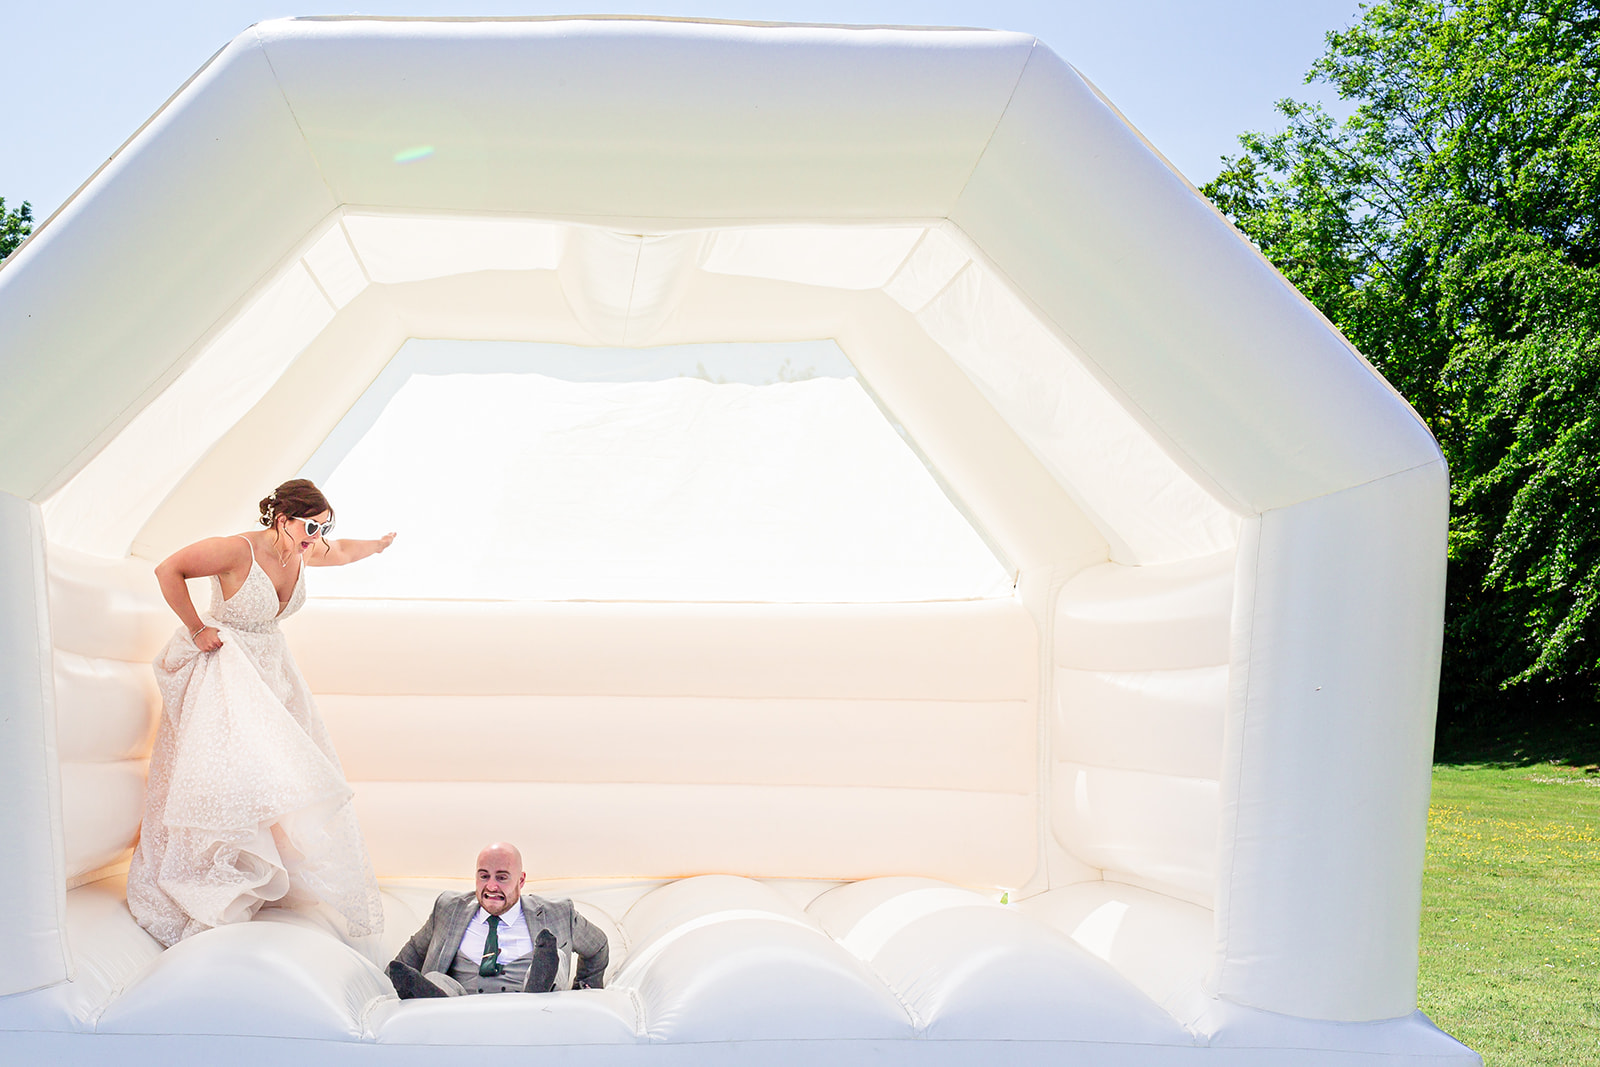 Newly married couple enjoy some fun time on the bouncy castle in the Brendenbury Court Barns gardens